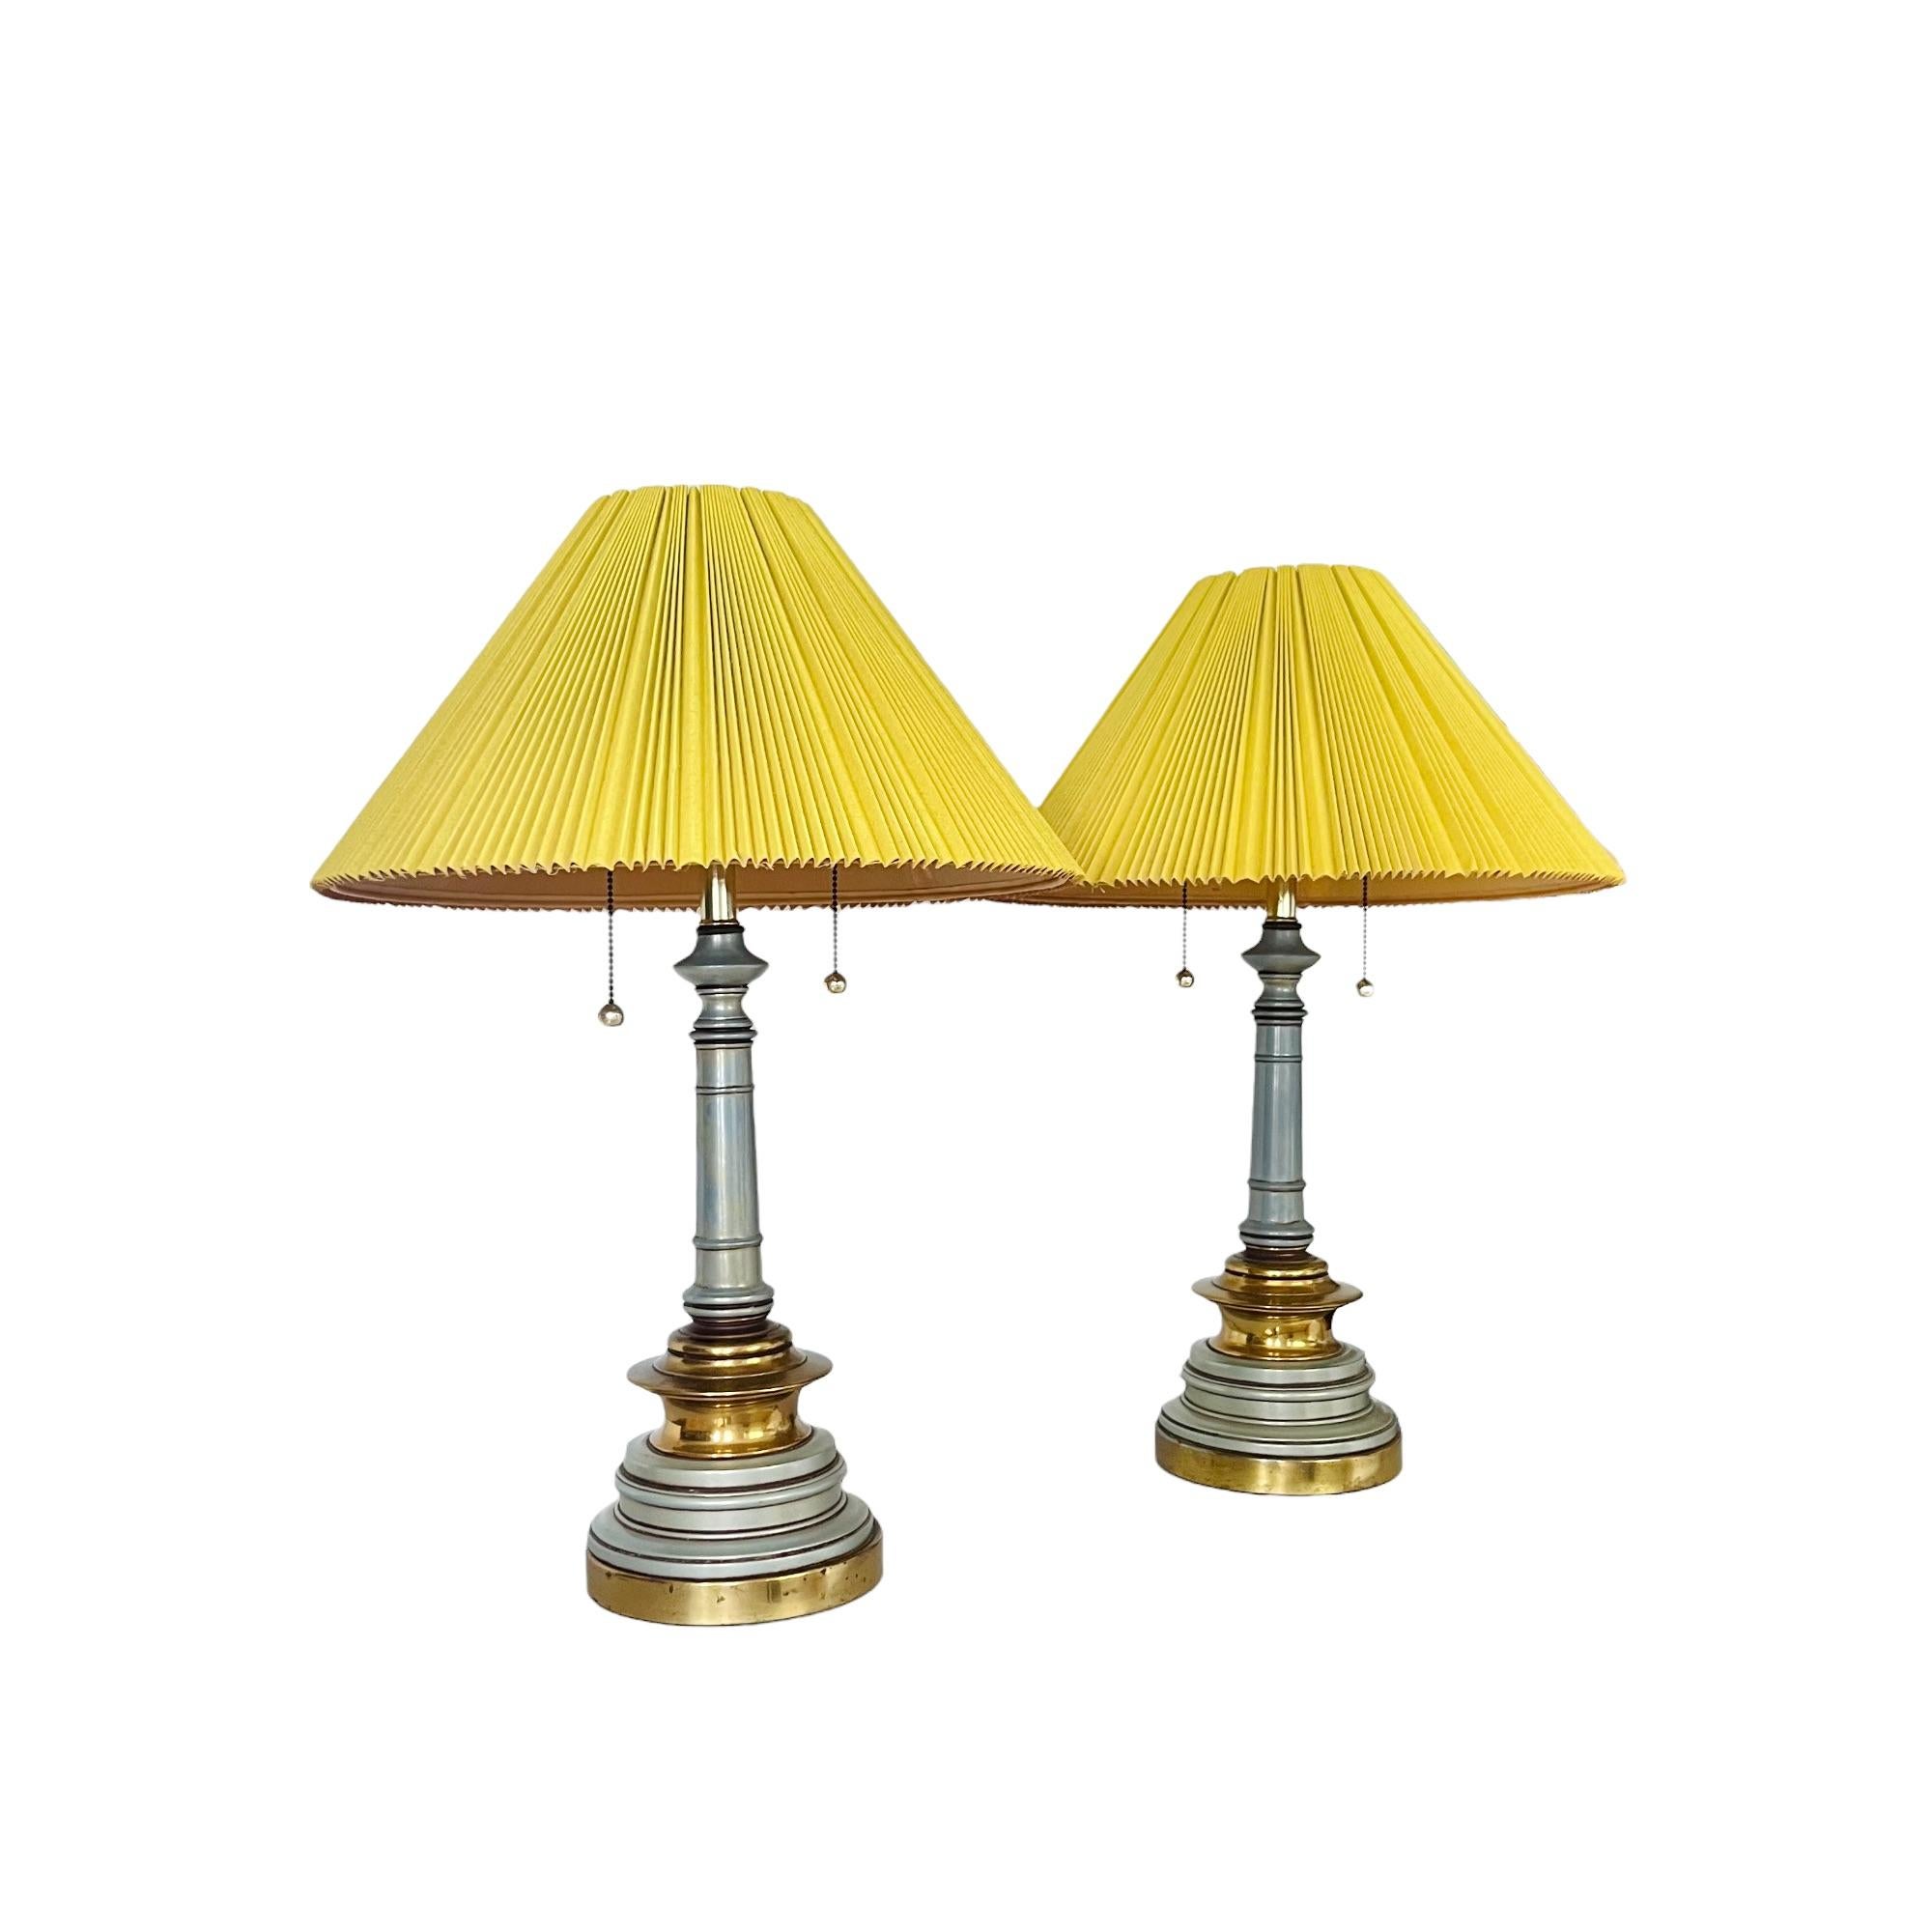 An eclectic mid 20th century pair of Hollywood Regency style enamelwork table lamps with brightly painted shades. Pearlescent blue green enameled body with polished brass details and base. Hardback (plastic under fabric) pleated linen blend lamp